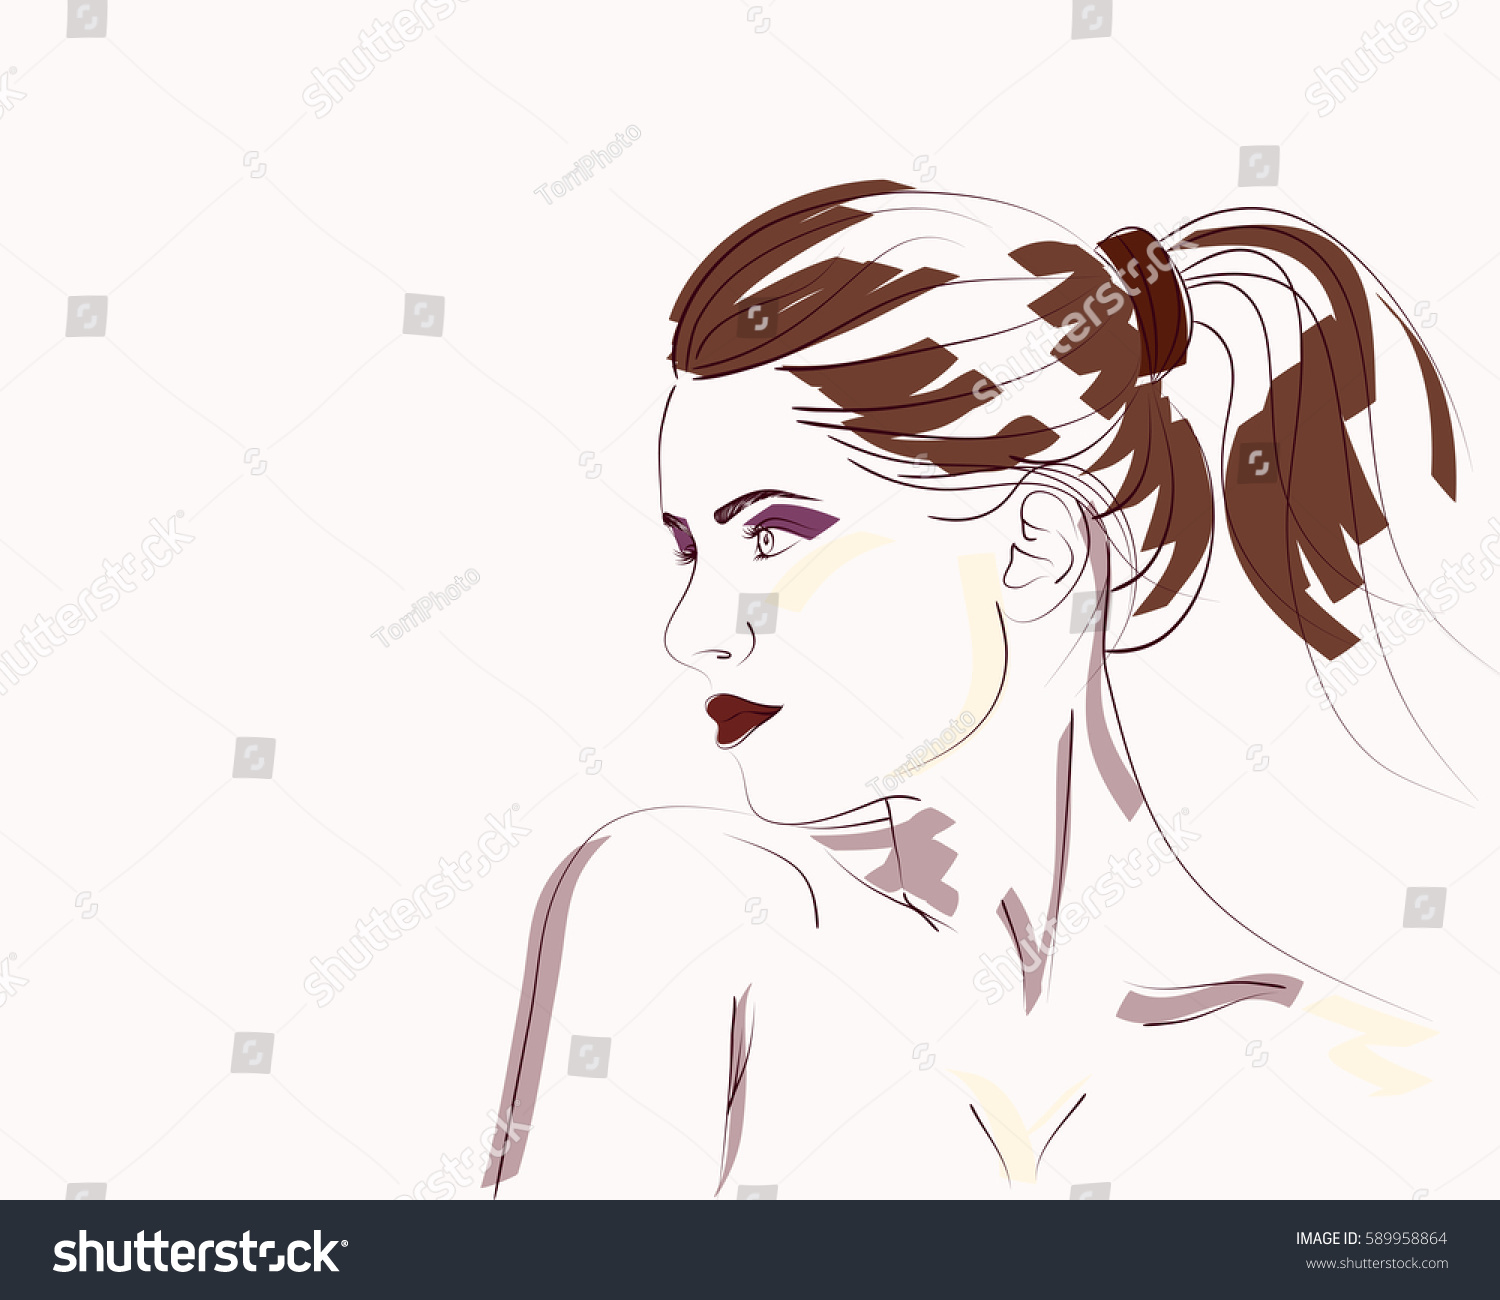 https://www.shutterstock.com/image-vector/hand-drawn-fashion-portrait-young-woman-589958864